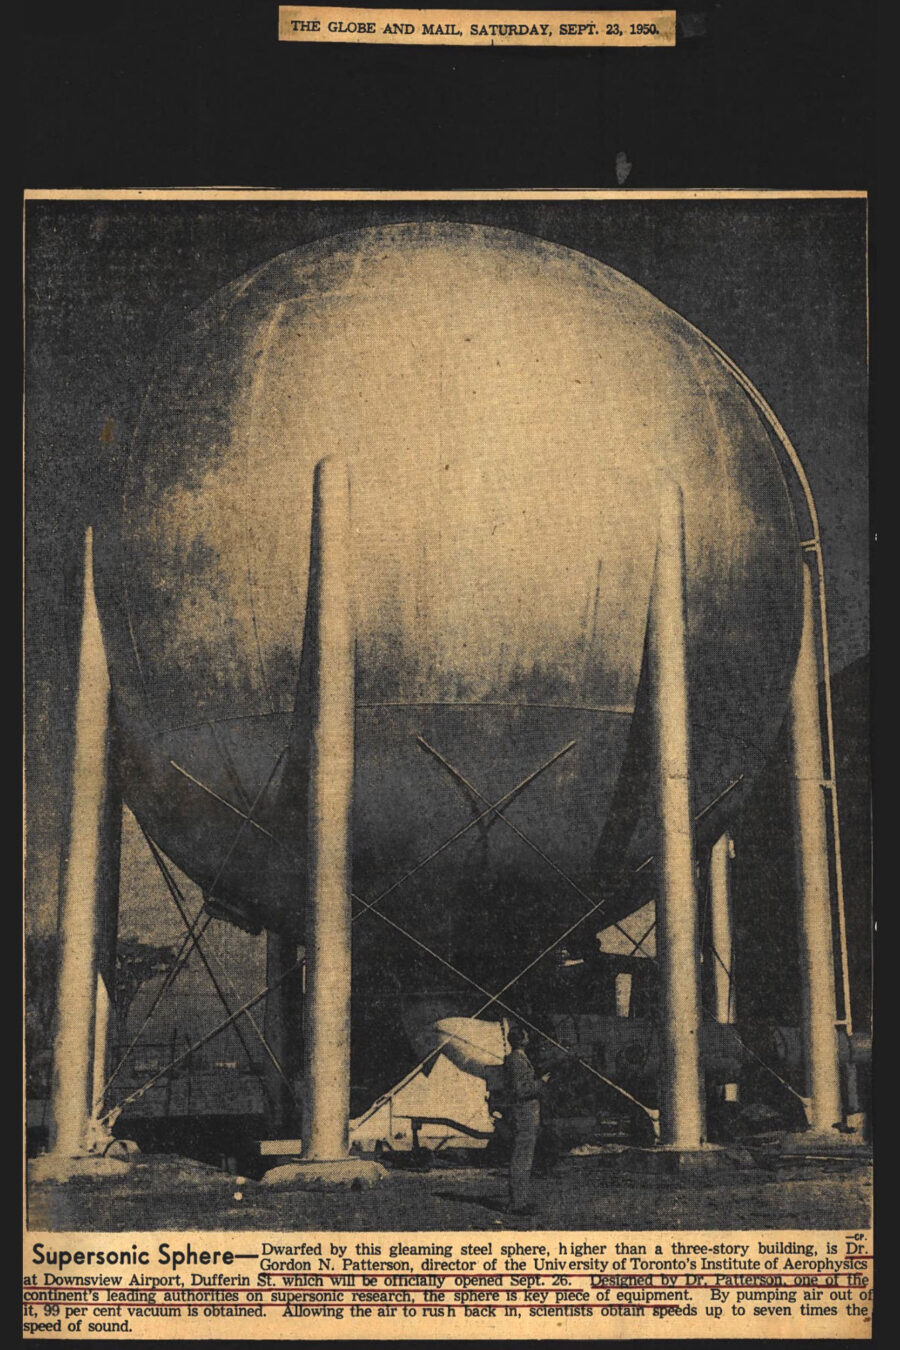 newspaper clipping from The Globe and Mail, Saturday, September 23, 1950
Photo in clipping: A three-story steel vacuum sphere supported by tall, thin steel columns towers over Doctor Gordon Patterson standing beneath it.

Caption: Supersonic Sphere – Dwarfed by this gleaming steel sphere, higher than a three-story building is Doctor Gordon N Patterson, Director of the University of Toronto's Institute of Aerophysics at Downsview Airport, Dufferin St. which will be officially opened September 26. Designed by Doctor Patterson, one of the continents leading authorities on supersonic research, the sphere is key piece of equipment. By pumping air out of it, 99% vacuum is obtained. Allowing the air to rush back in, scientists obtain speeds up to seven times the speed of sound.